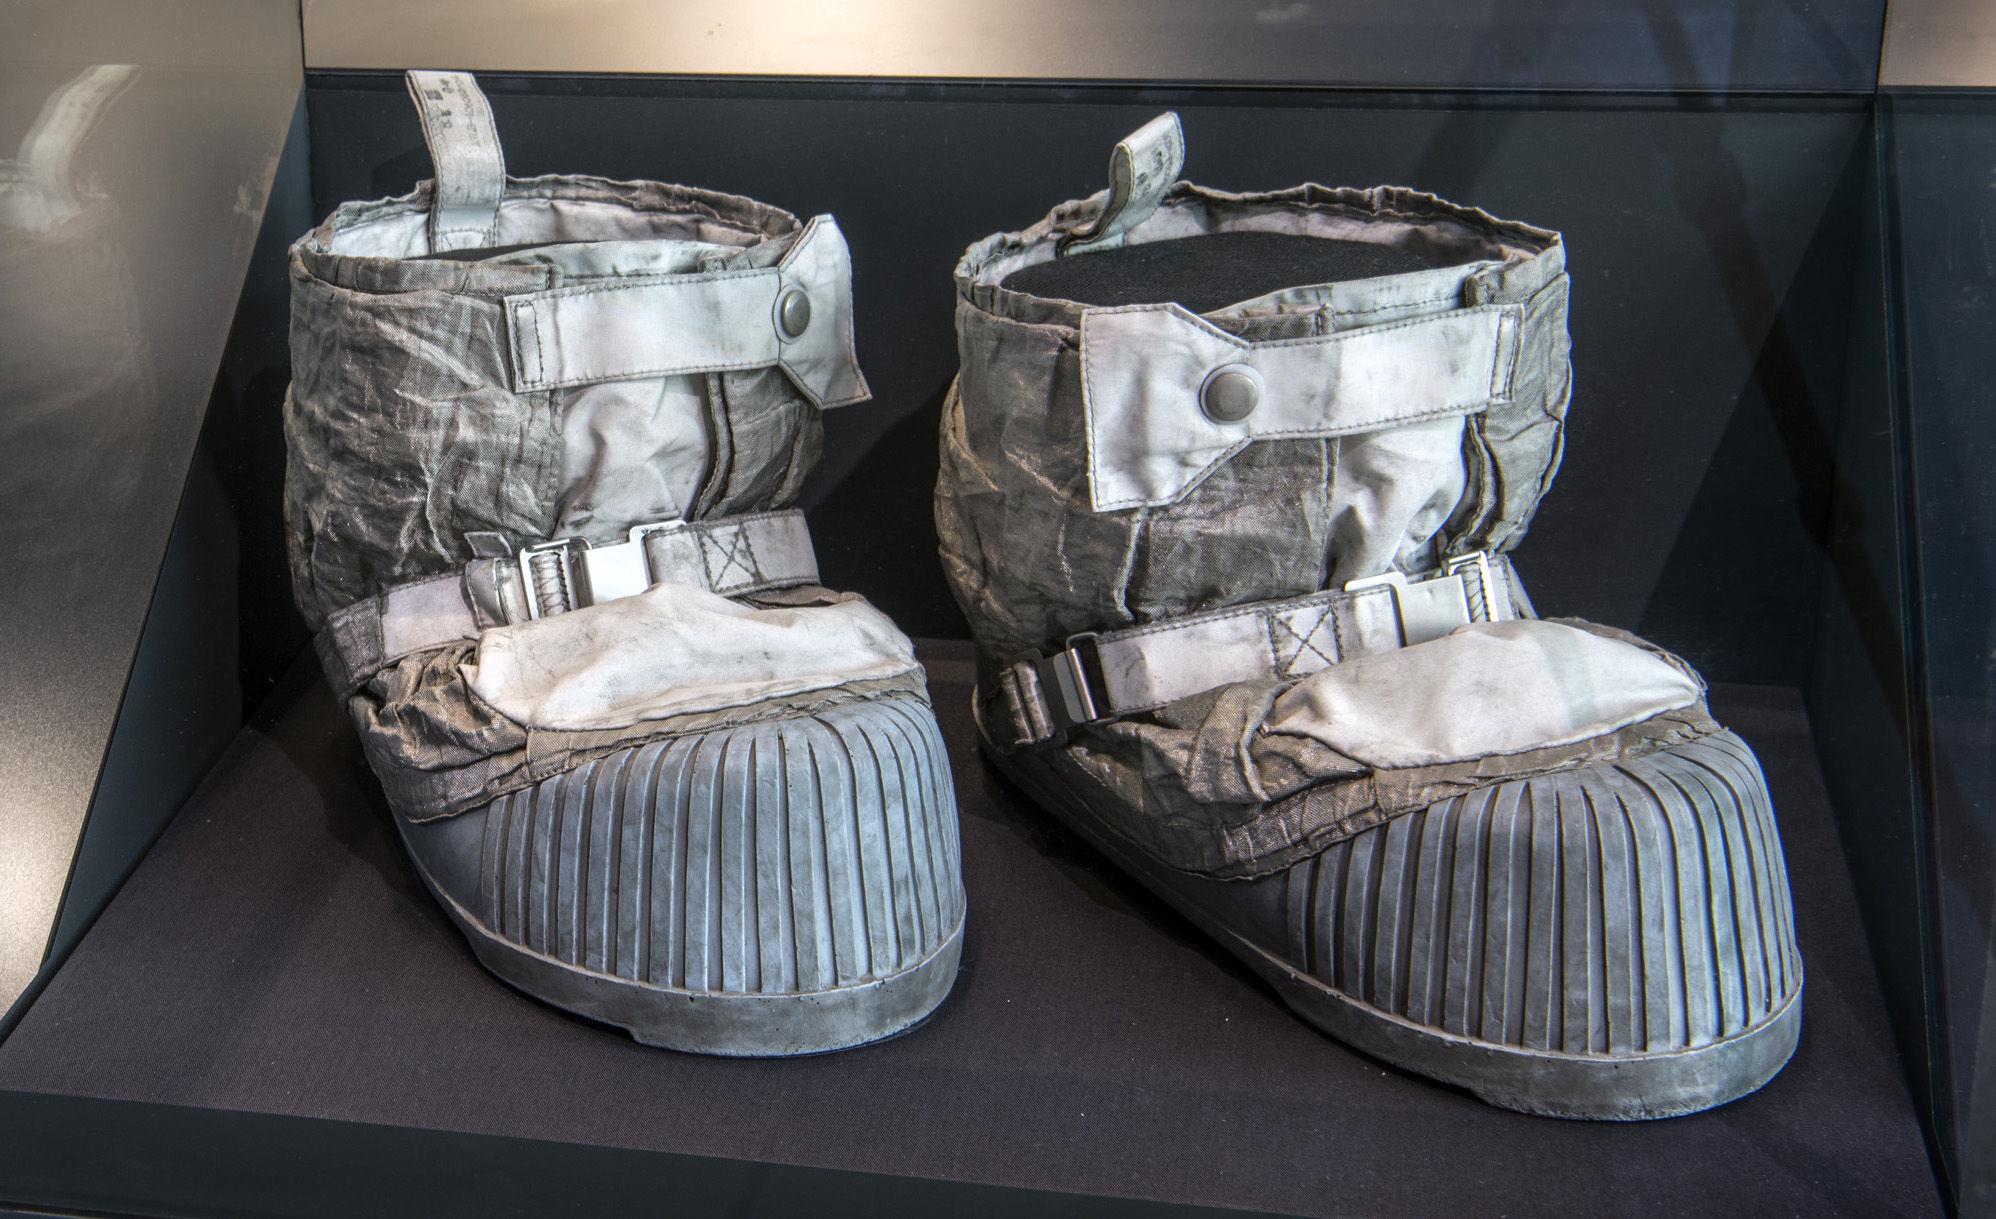 The last boots to walk on the moon, Gene Cernan's boots from Apollo 17.jpeg